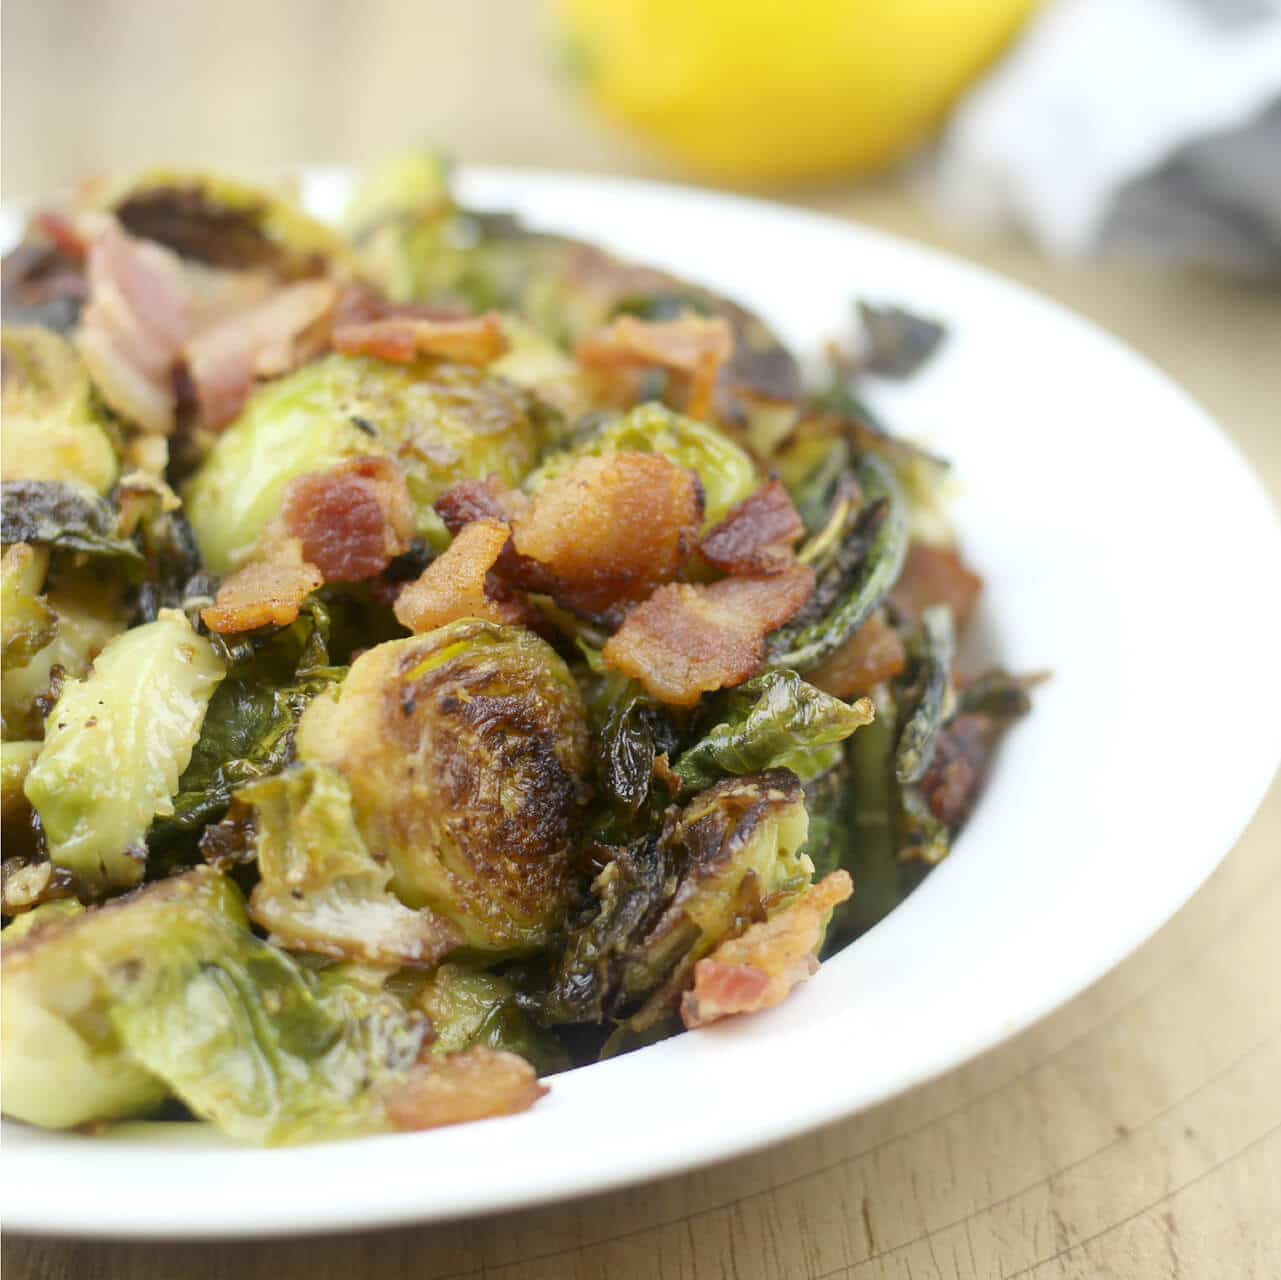 Brussels sprouts sauteed and topped with a lemon and Dijon vinaigrette, then sprinkled with Parmesan cheese and bacon—a new twist on a favorite vegetable!